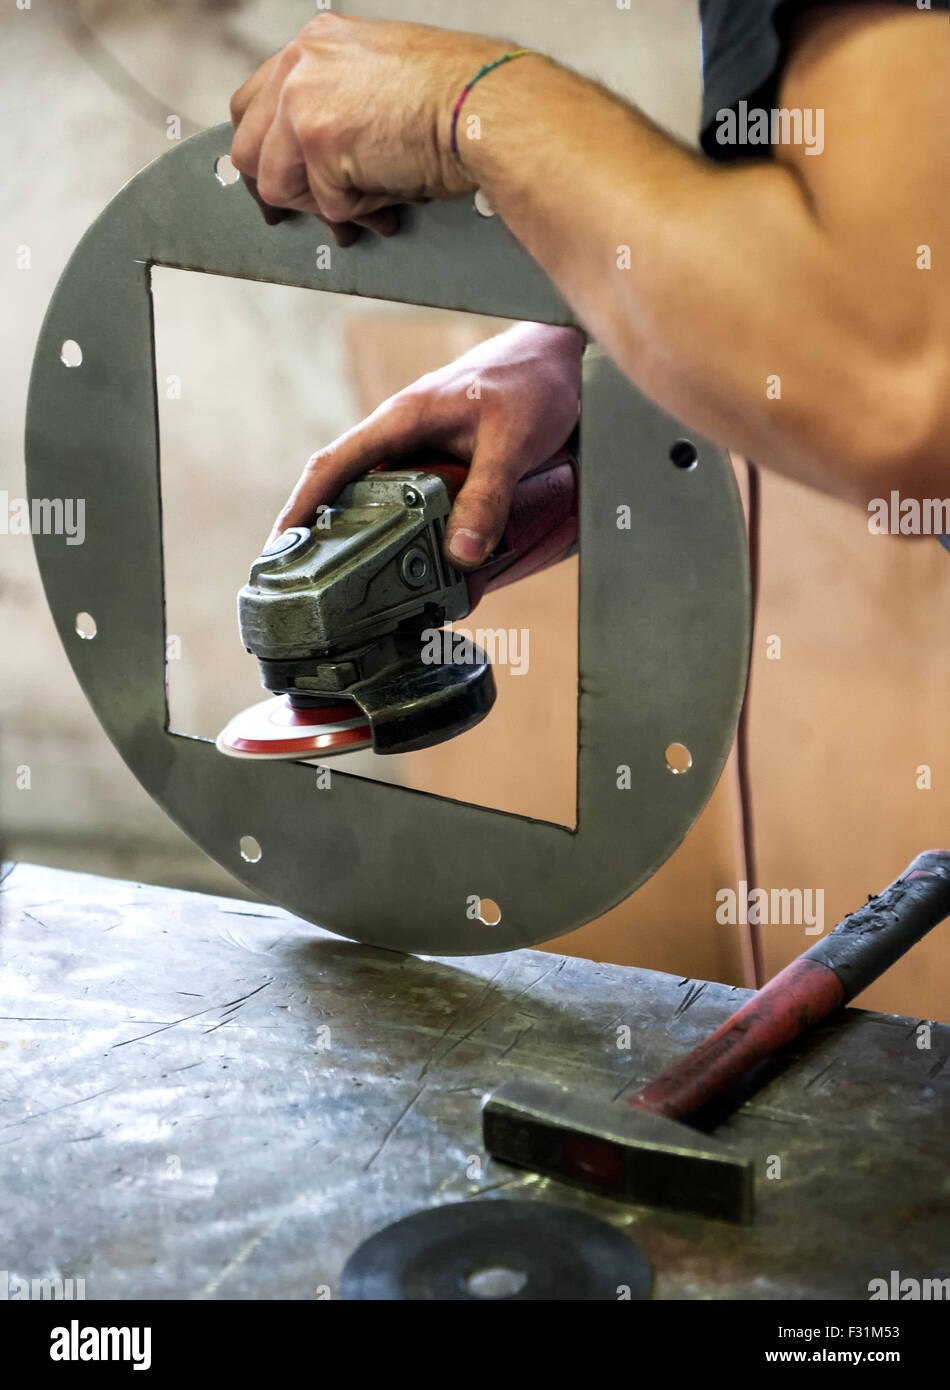 Metalworker sanding a metal component with a disc sander Stock Photo